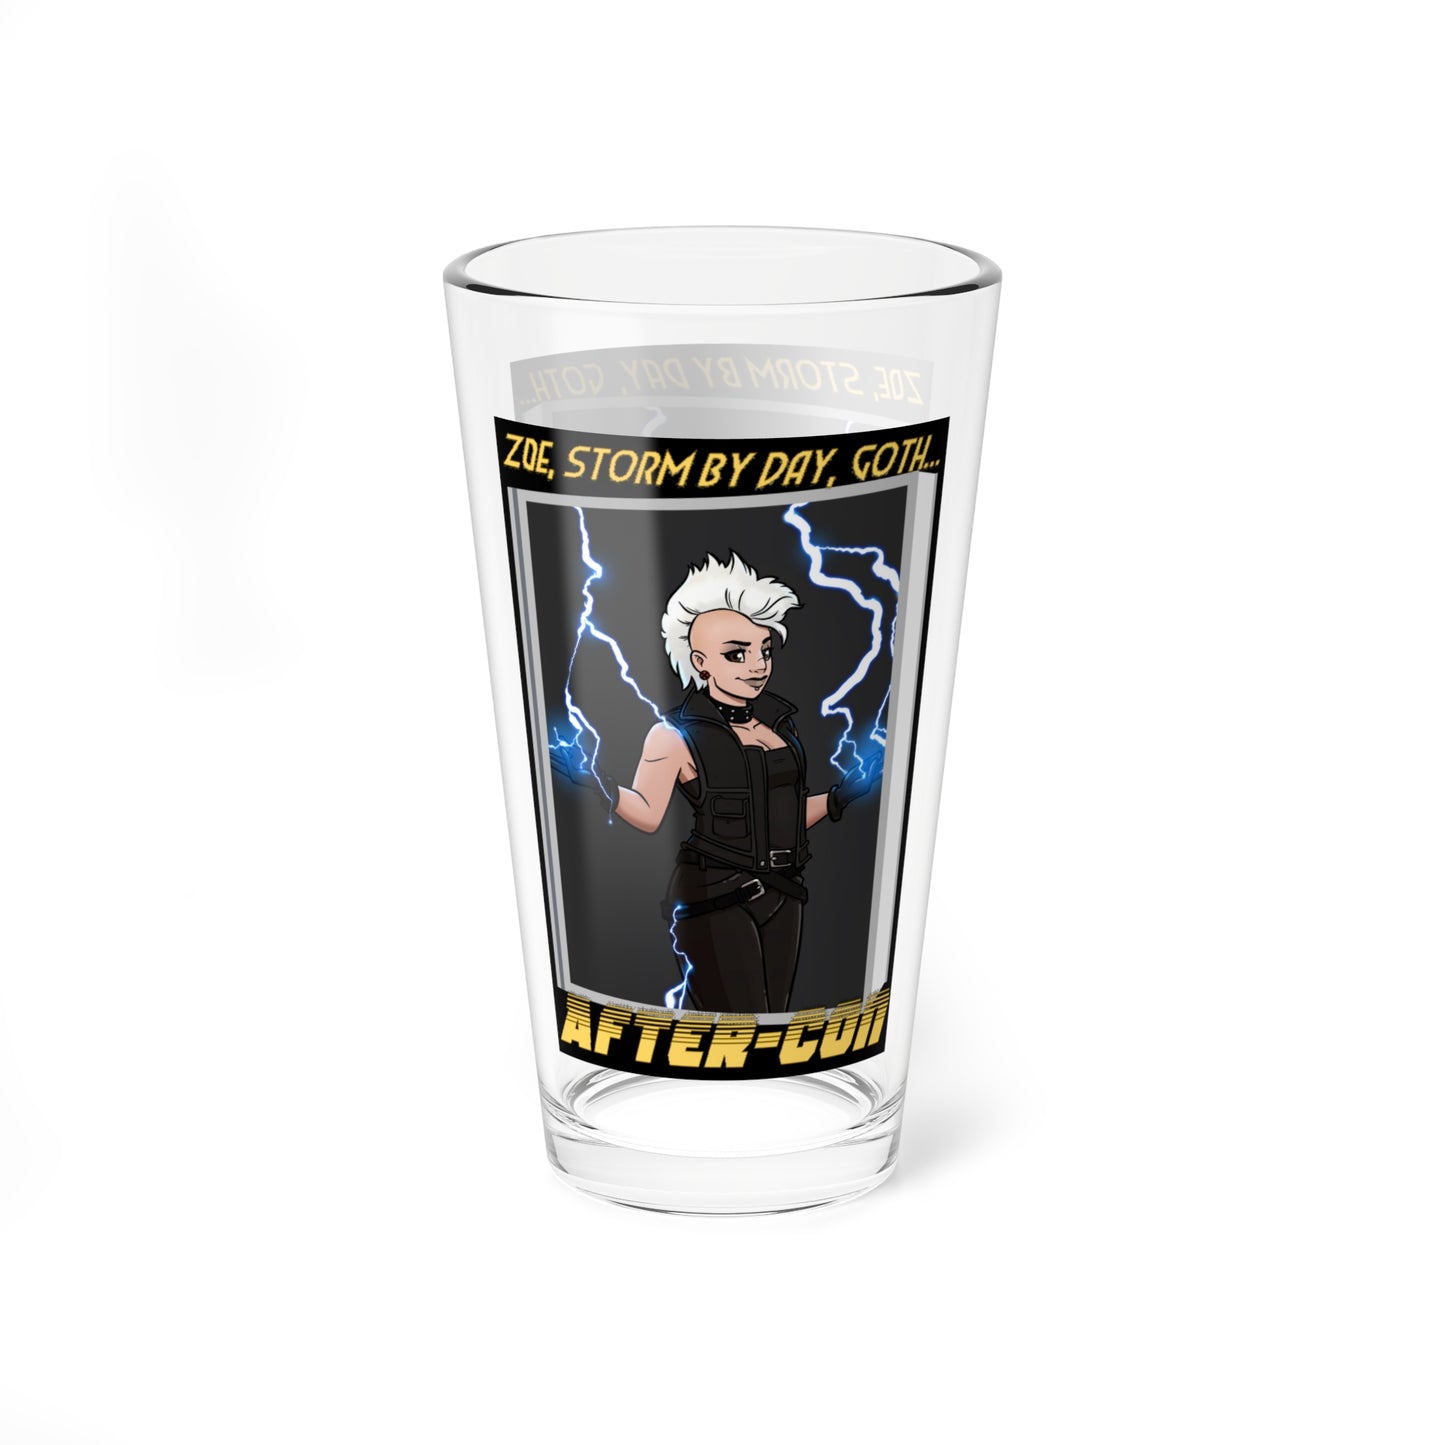 After-Con "Zoe" Pint Glass, 16oz